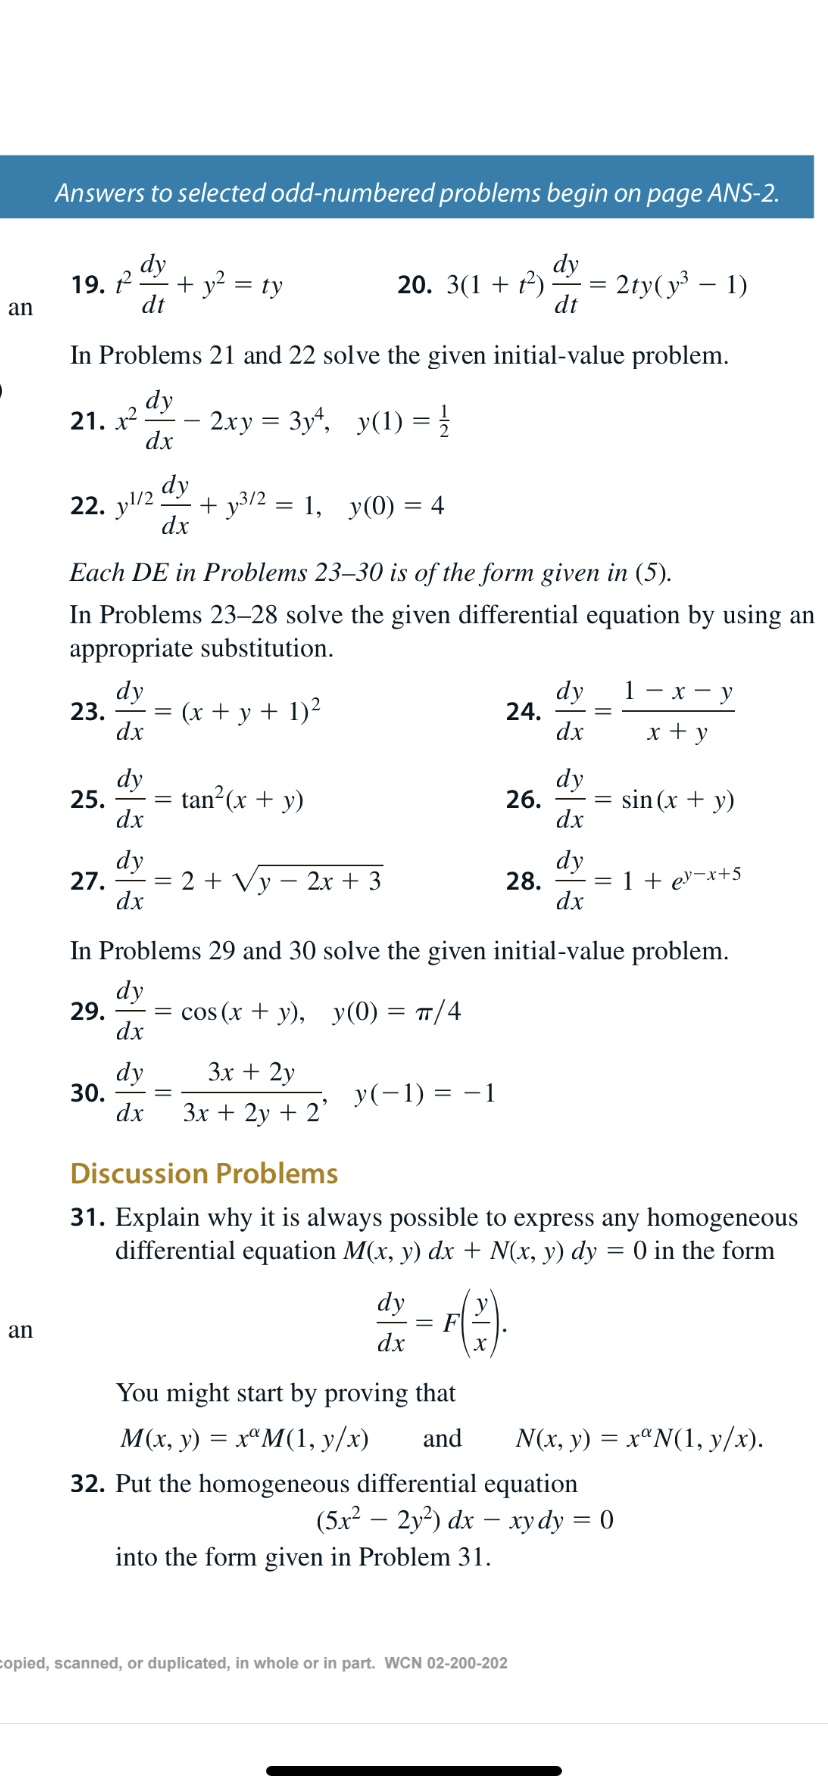 Answers to selected odd-numbered problems begin on page ANS-2.
dy
dy
2ty(y – 1)
dt
+ y? = ty
dt
19. P
20. 3(1 + t²)
an
In Problems 21 and 22 solve the given initial-value problem.
dy
2ху %3 Зу, у(1) %3D}
21. x
dx
dy
+ y3/2 = 1, y(0) = 4
dx
22. y/2
Each DE in Problems 23–30 is of the form given in (5).
In Problems 23–28 solve the given differential equation by using an
appropriate substitution.
dy
dy
24.
dx
1 — х — у
(x + y + 1)²
23.
x + y
dx
dy
dy
26.
dx
tan?(x + y)
sin (x + y)
25.
dx
dy
dy
28.
dx
2 + Vy – 2x + 3
1 + ev-x+5
27.
dx
In Problems 29 and 30 solve the given initial-value problem.
dy
29.
dx
cos (x + y), y(0) = 7/4
Зх + 2y
dy
30.
dx
y(-1) = –1
Зх + 2у + 2"
Discussion Problems
31. Explain why it is always possible to express any homogeneous
differential equation M(x, y) dx + N(x, y) dy = 0 in the form
dy
F
dx
an
х
You might start by proving that
М'x, у) %— х"М(1, у/x)
N(x, y) = xªN(1, y/x).
and
32. Put the homogeneous differential equation
(5x2 — 2у?) dx — хуdy %3D 0
into the form given in Problem 31.
copied, scanned, or duplicated, in whole or in part. WCN 02-200-202
